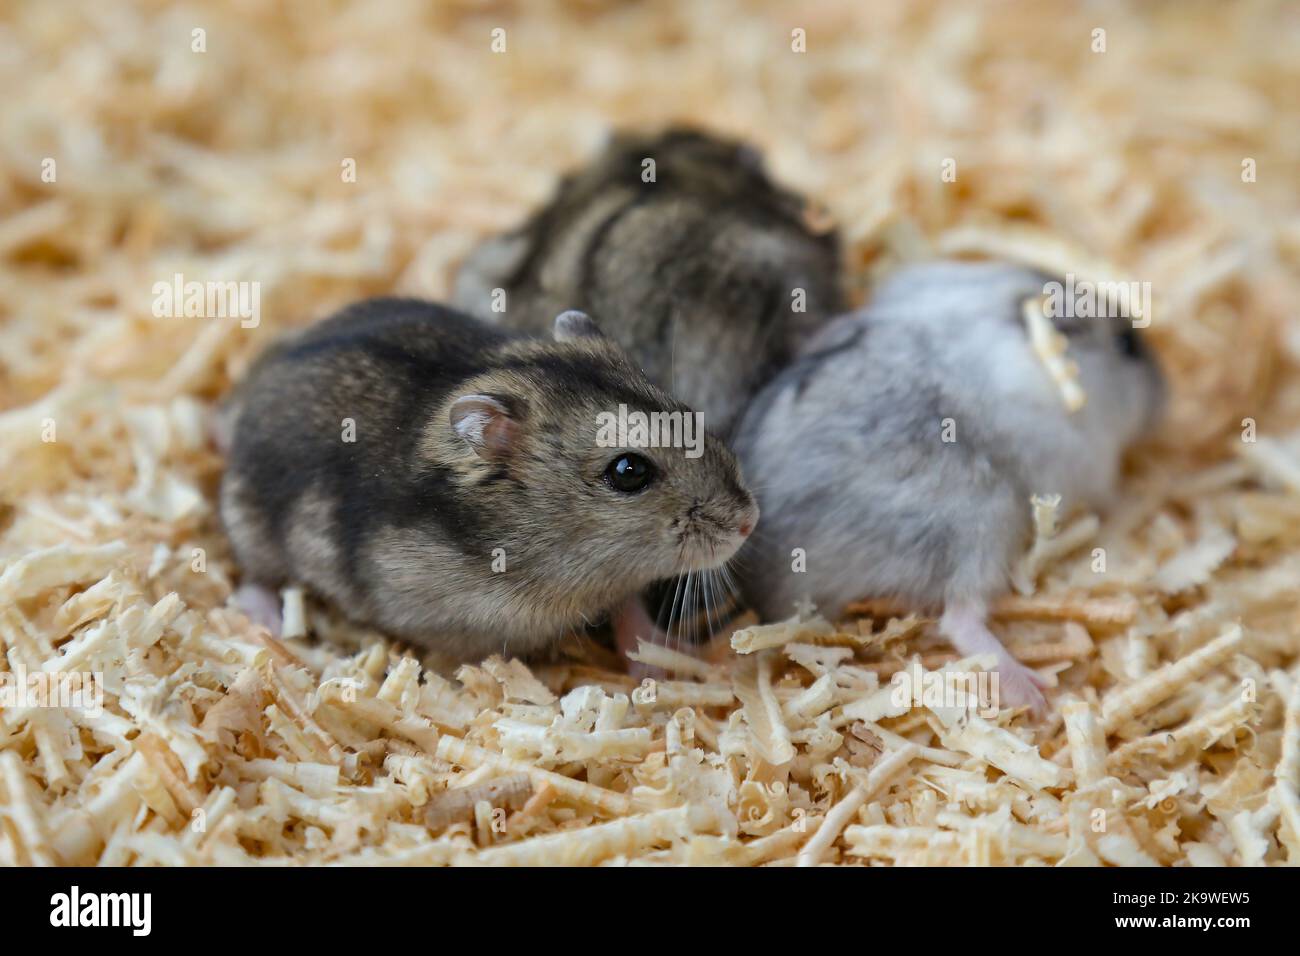 Gray and white hamsters sit on sawdust. Small hamsters on wood shavings. A brood of rodents. The offspring of mice. Cute pets. Stock Photo